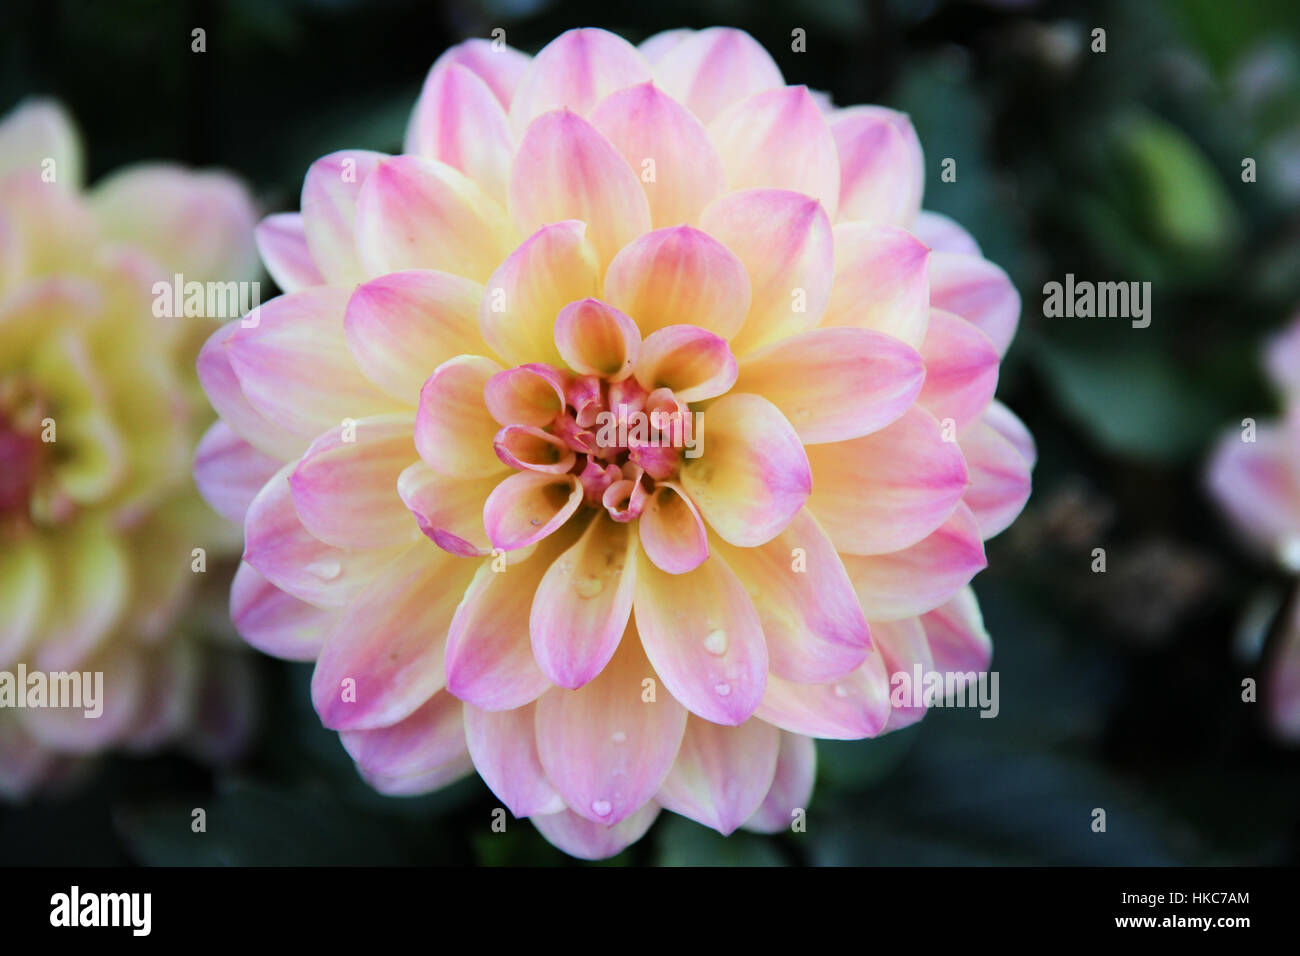 close up of a dahlia flower in full bloom with dew drops Stock Photo